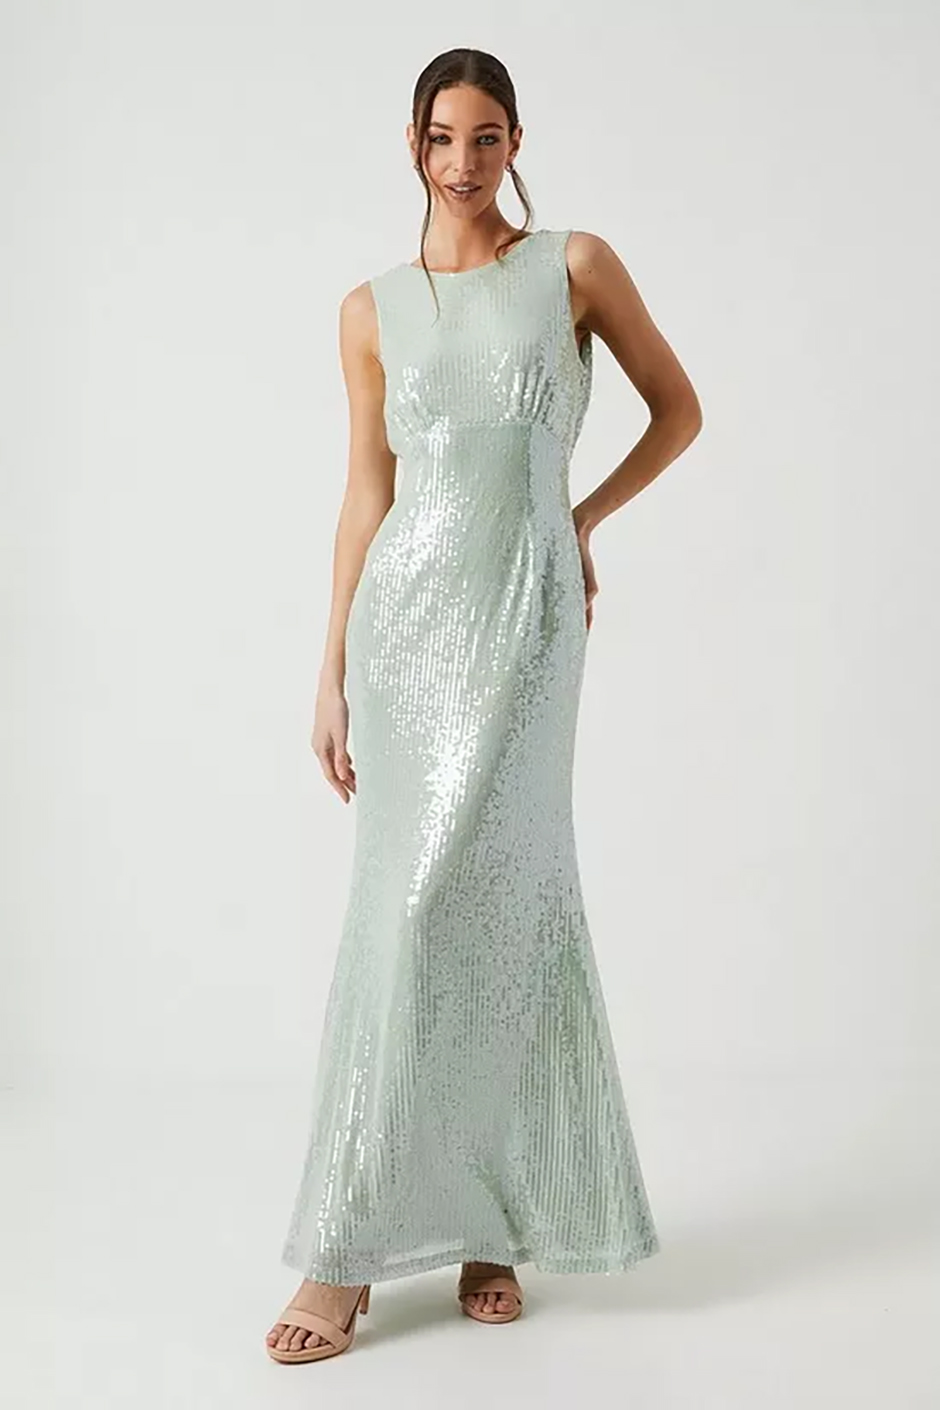 Spring bridesmaid dress - cowl back sequin maxi dress in Sage from Coast